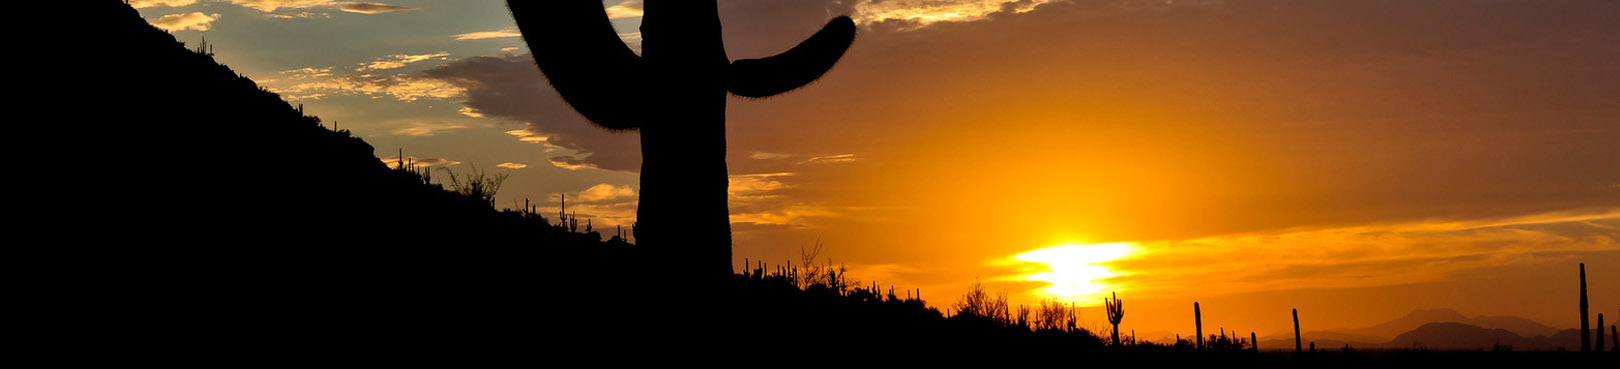 Mountainside saguaros silhouetted black against the bright orange backdrop of a Sonoran Desert sunset.